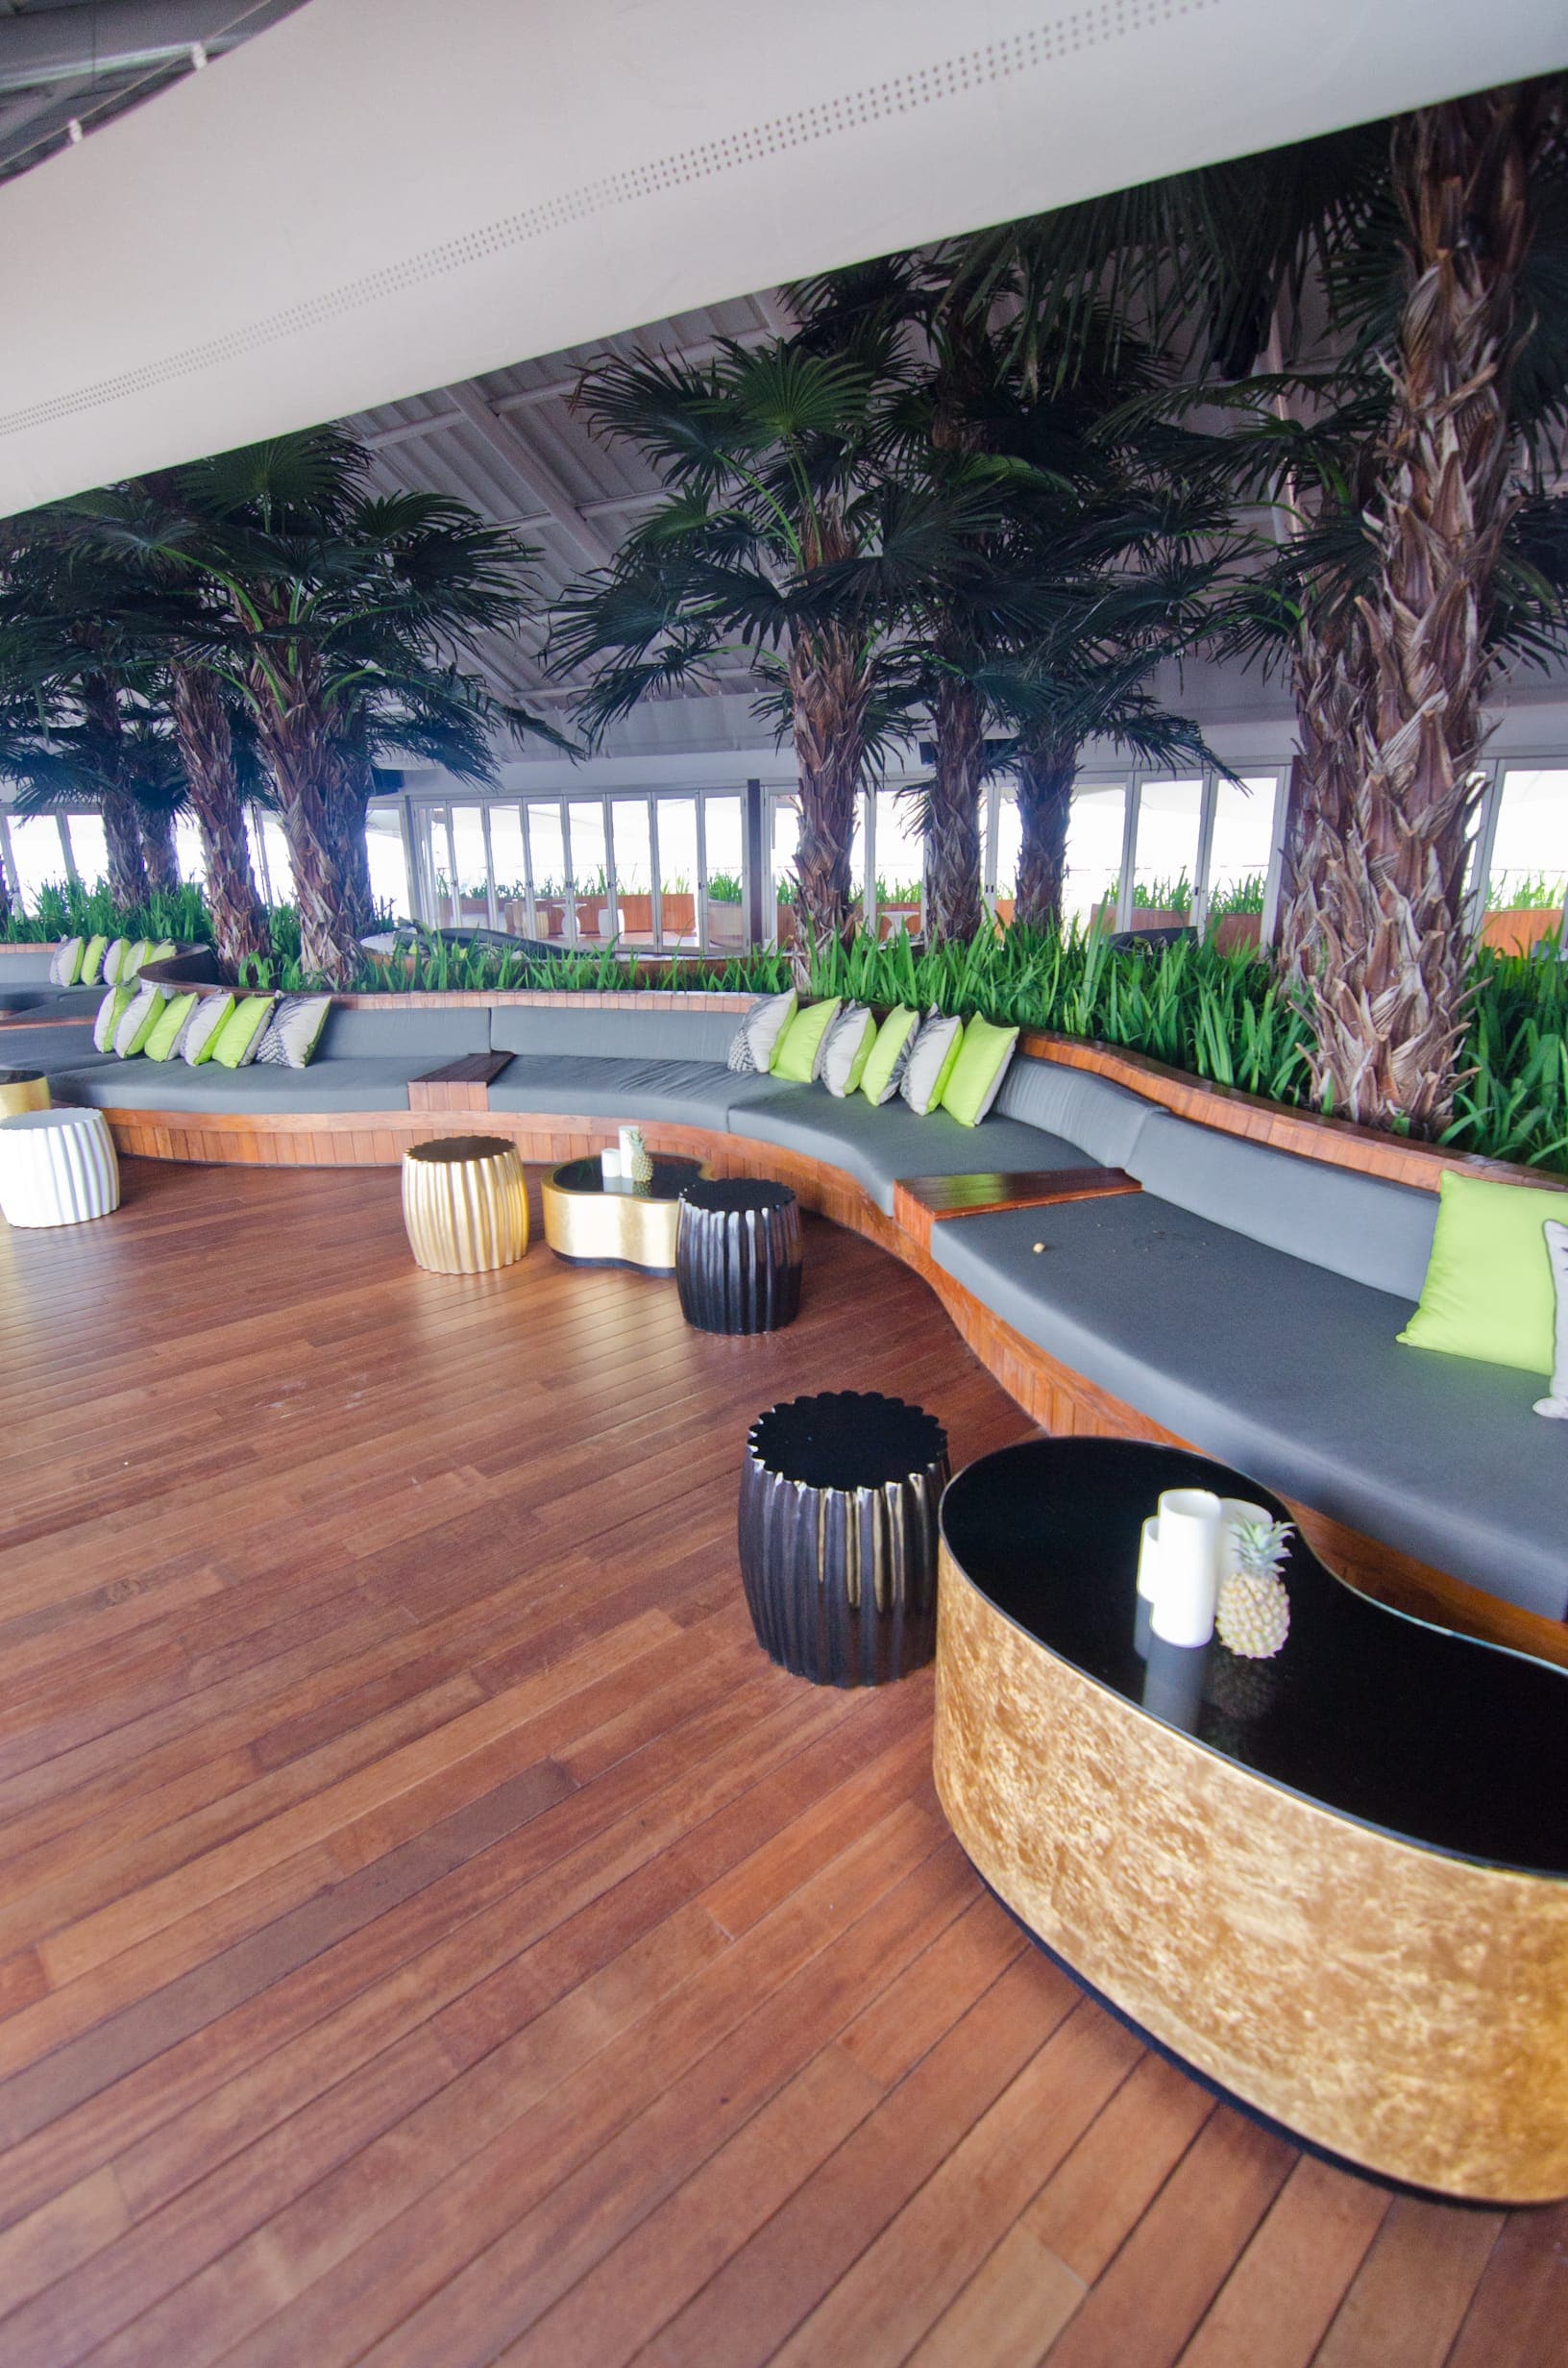 Double Six 66 Luxury Hostel in Bali Indonesia with wood decking Softline Merbau without visible fixations decking system